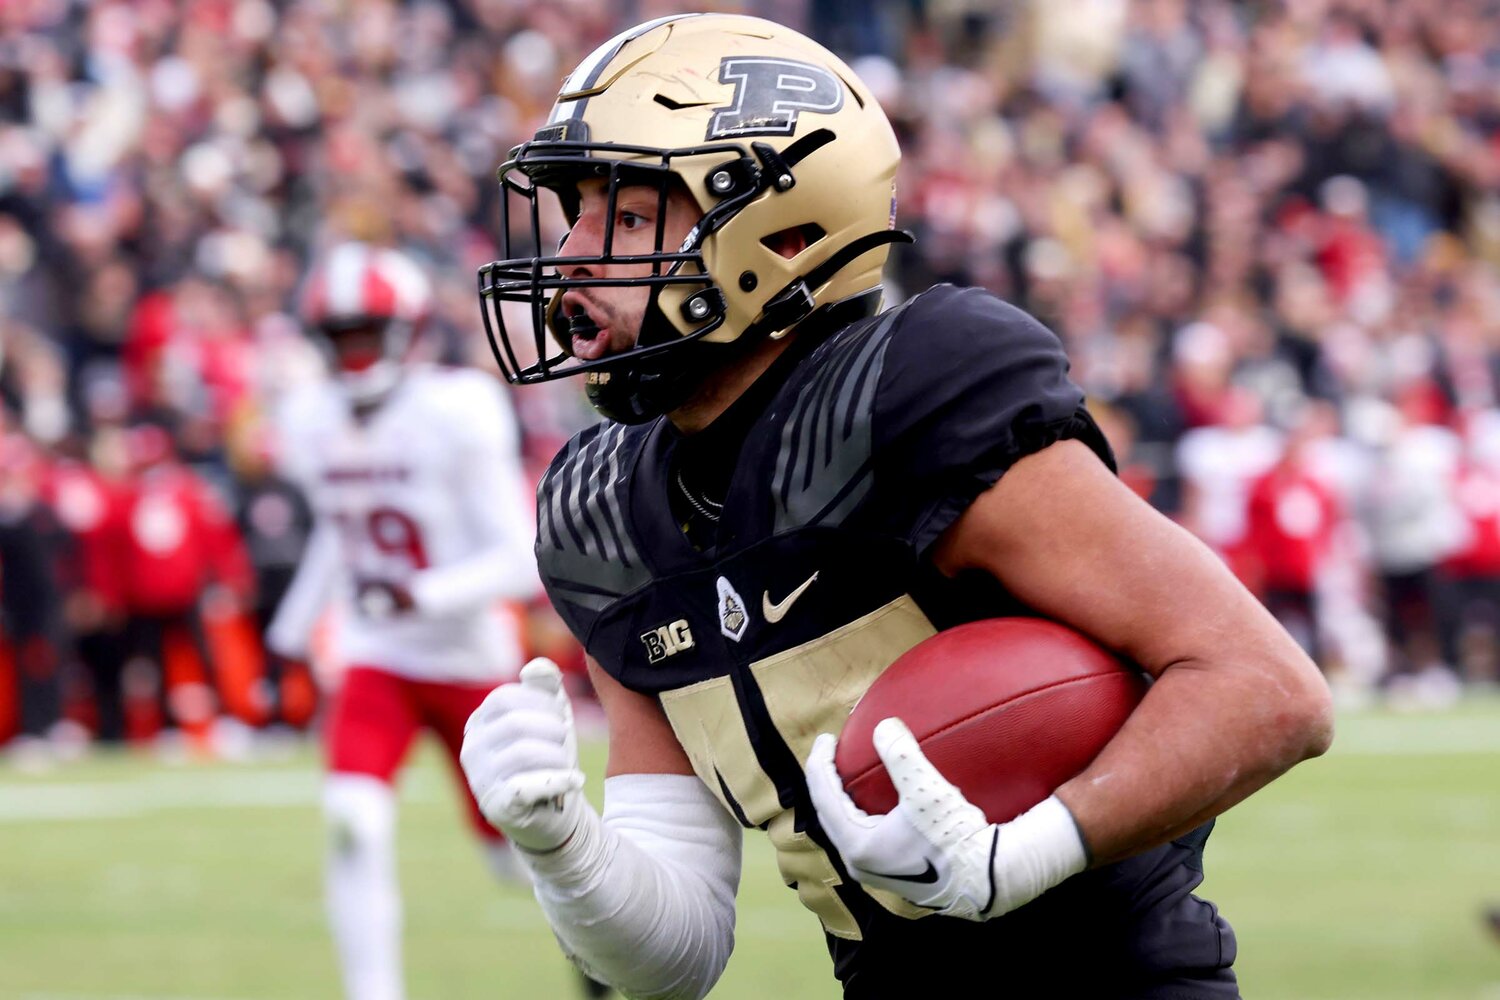 Devin Mockobee of Purdue - run after catch, gain of 33 yards and a TD